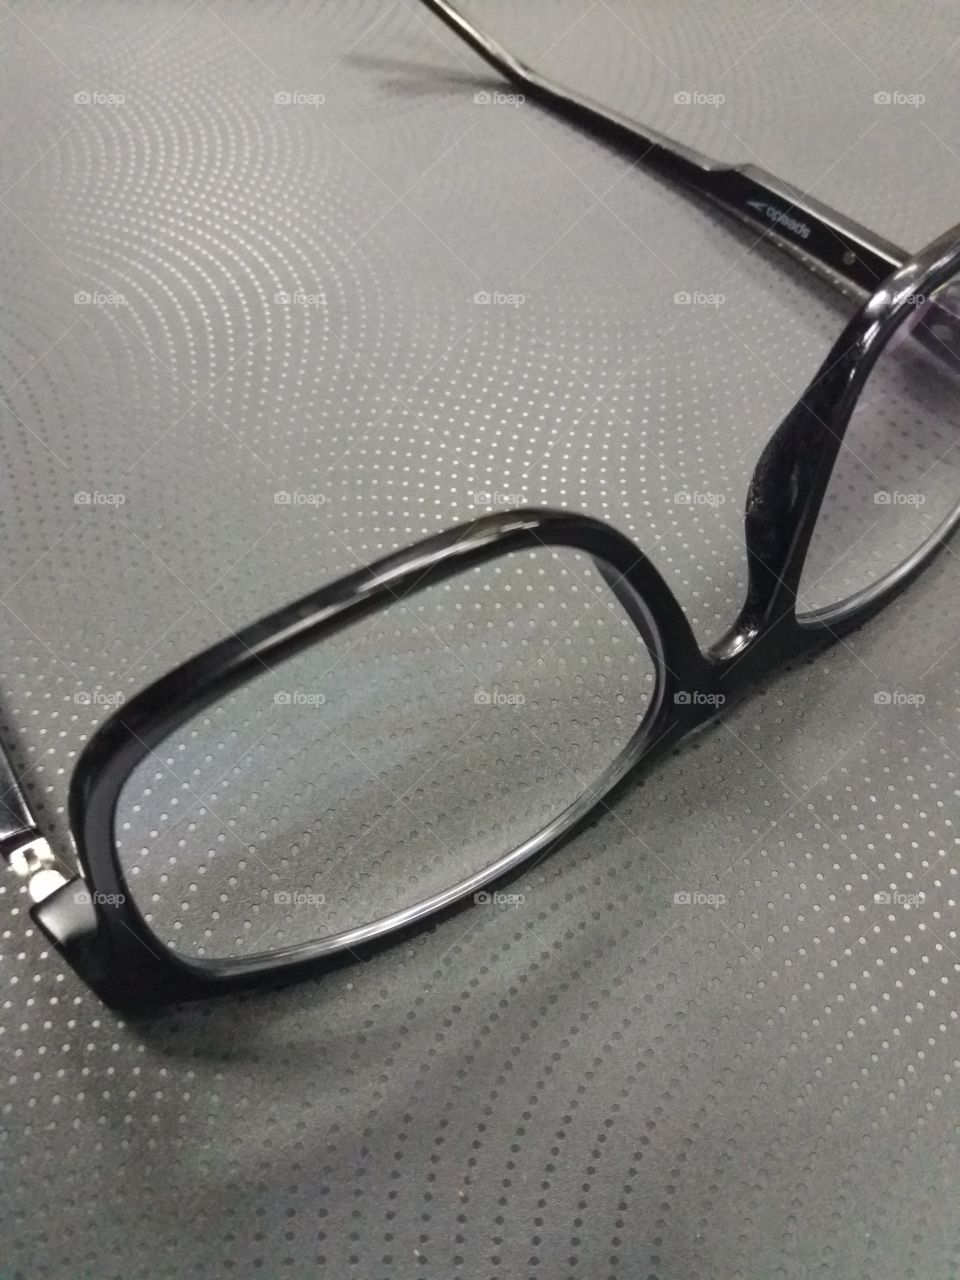 my glasses on the notebook